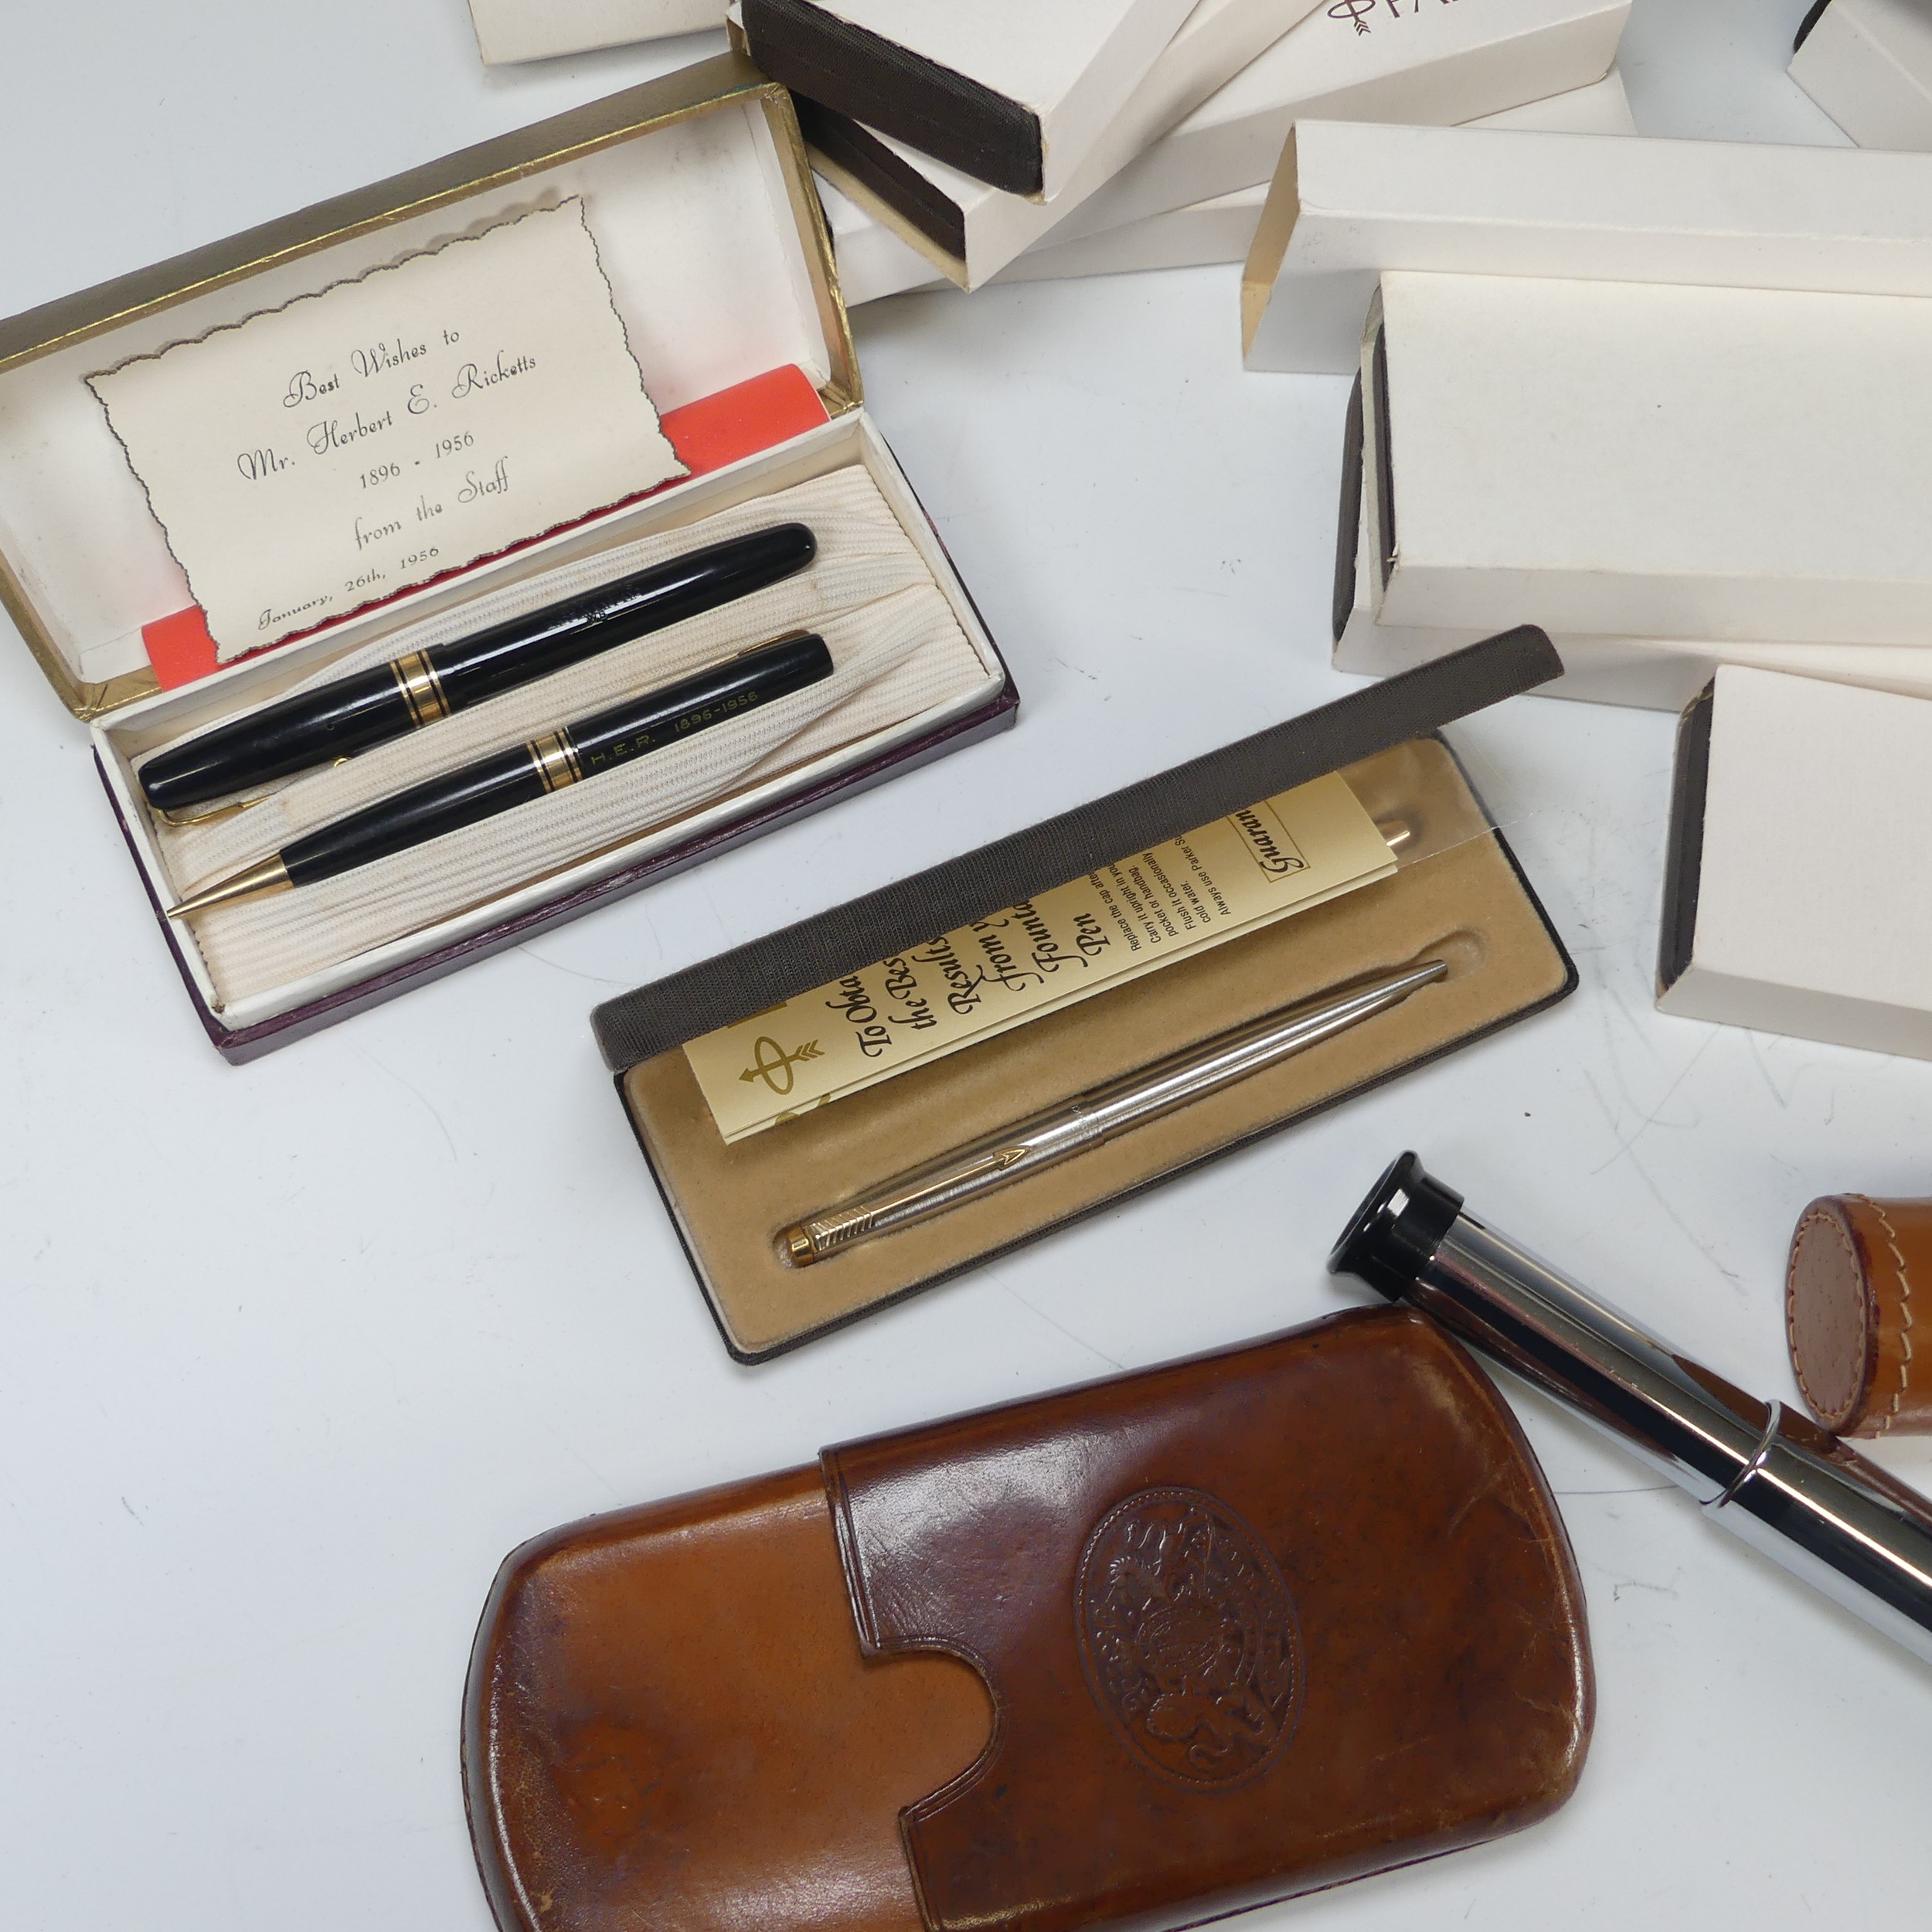 A Watermans W5 fountain Pen and propelling Pencil set, presented to 'Mr. Herbert E. Ricketts', - Image 3 of 4